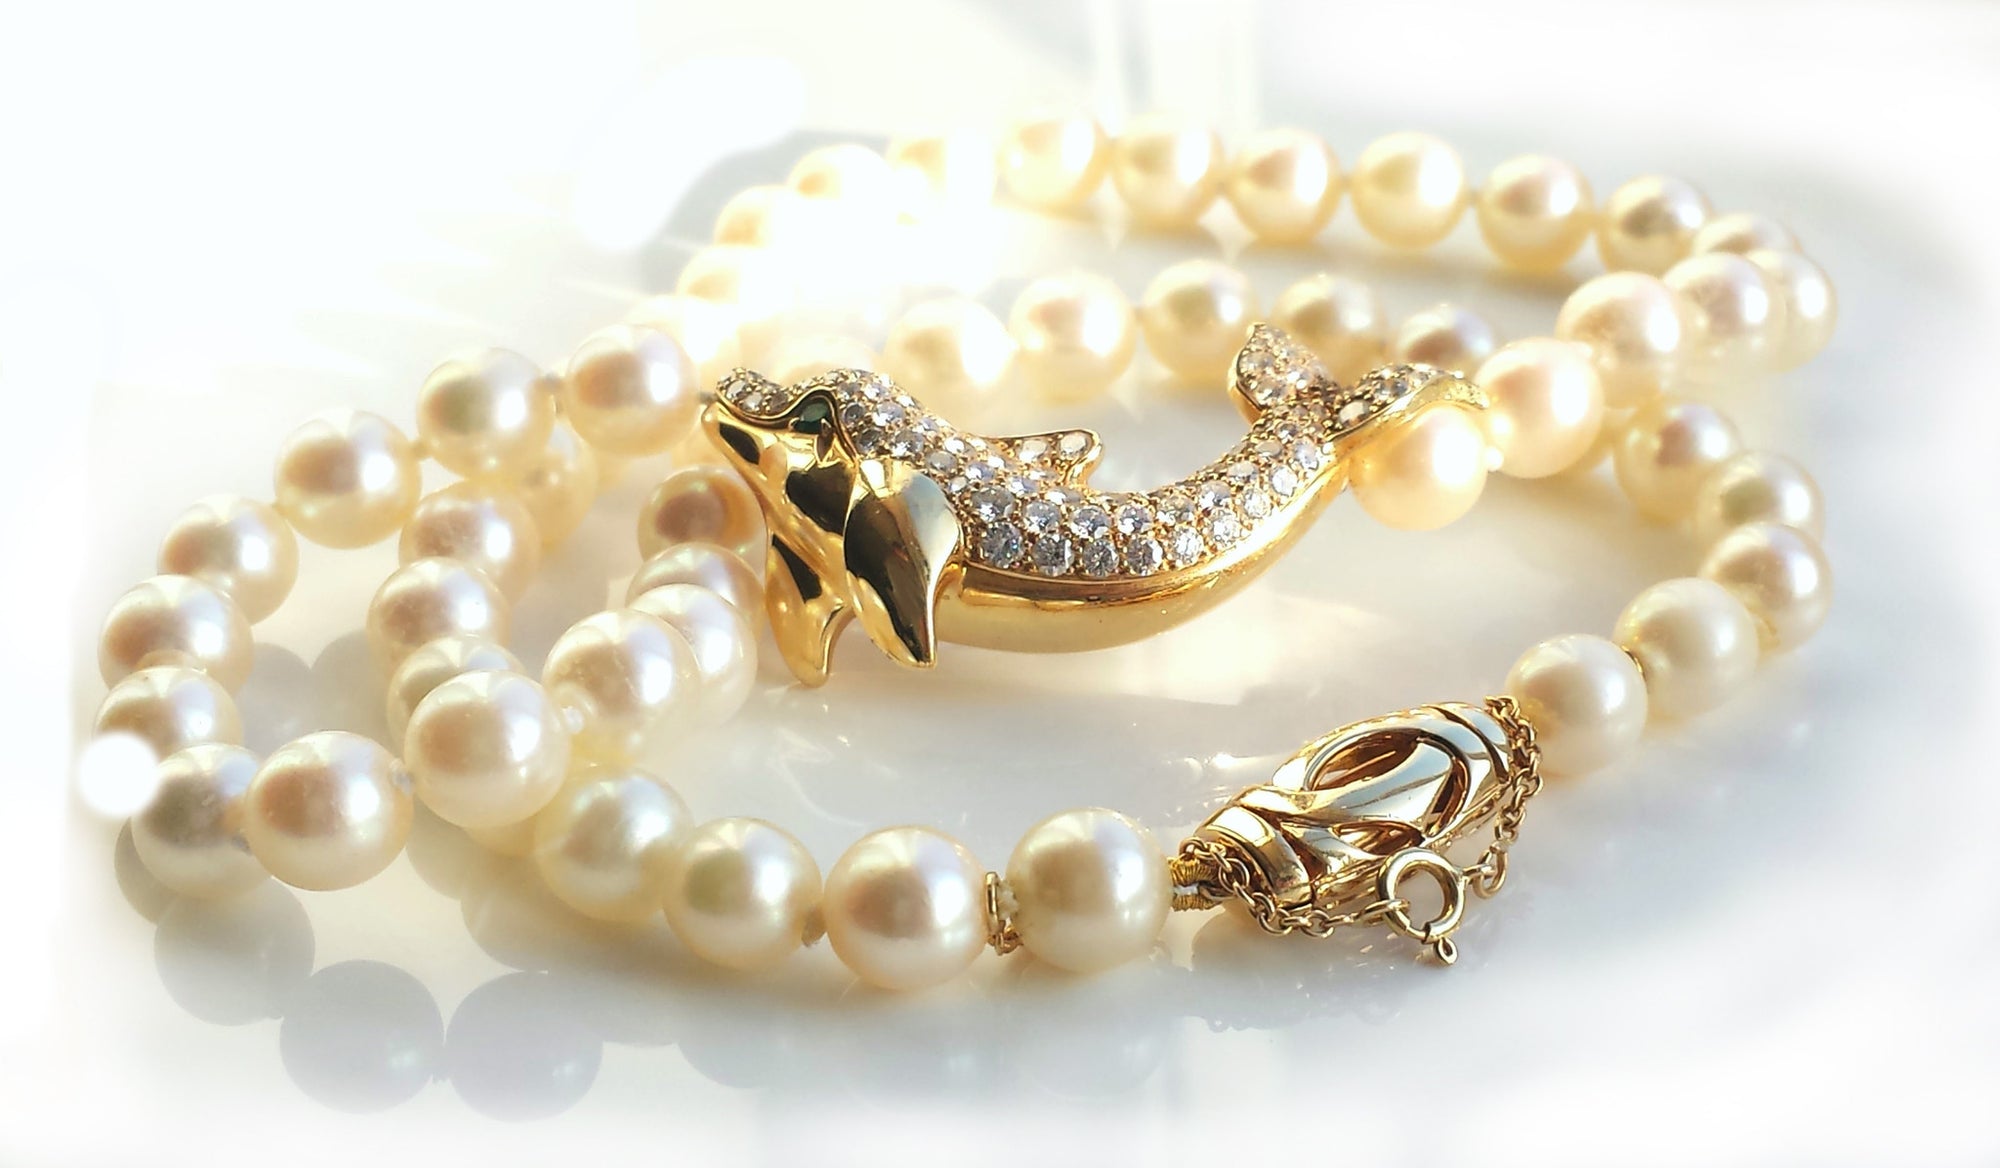 Cartier Akoya Pearl Dolphin Necklace in 18K Gold set with Diamonds & Emerald